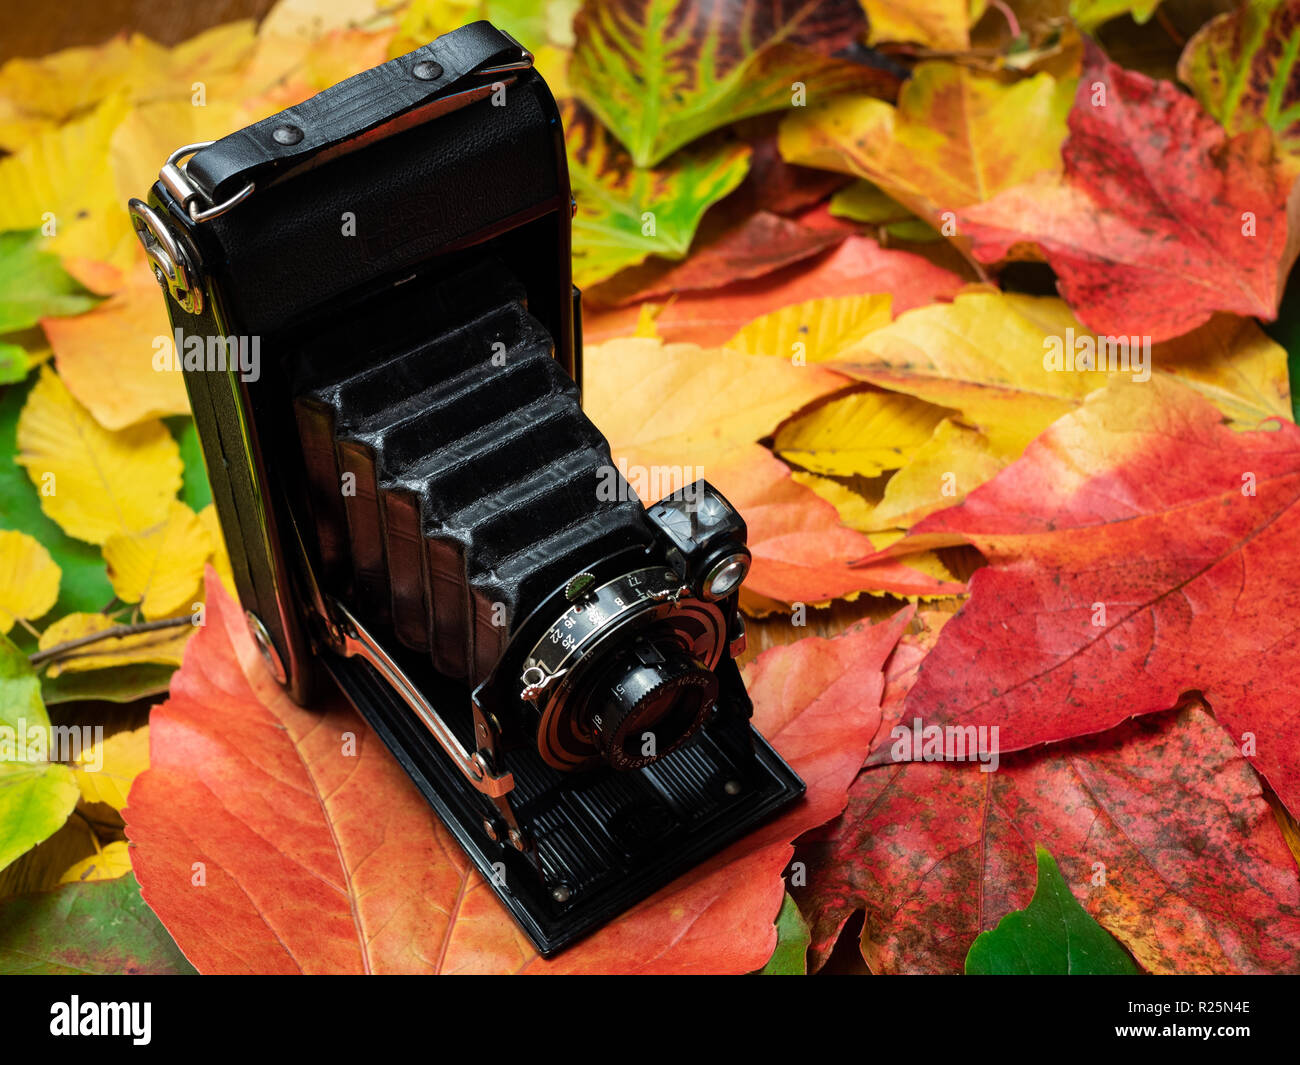 An folding camera on leaves of all autumn colours (orange, red, yellow and green). Arranged on a table. Photographed indoors. Stock Photo